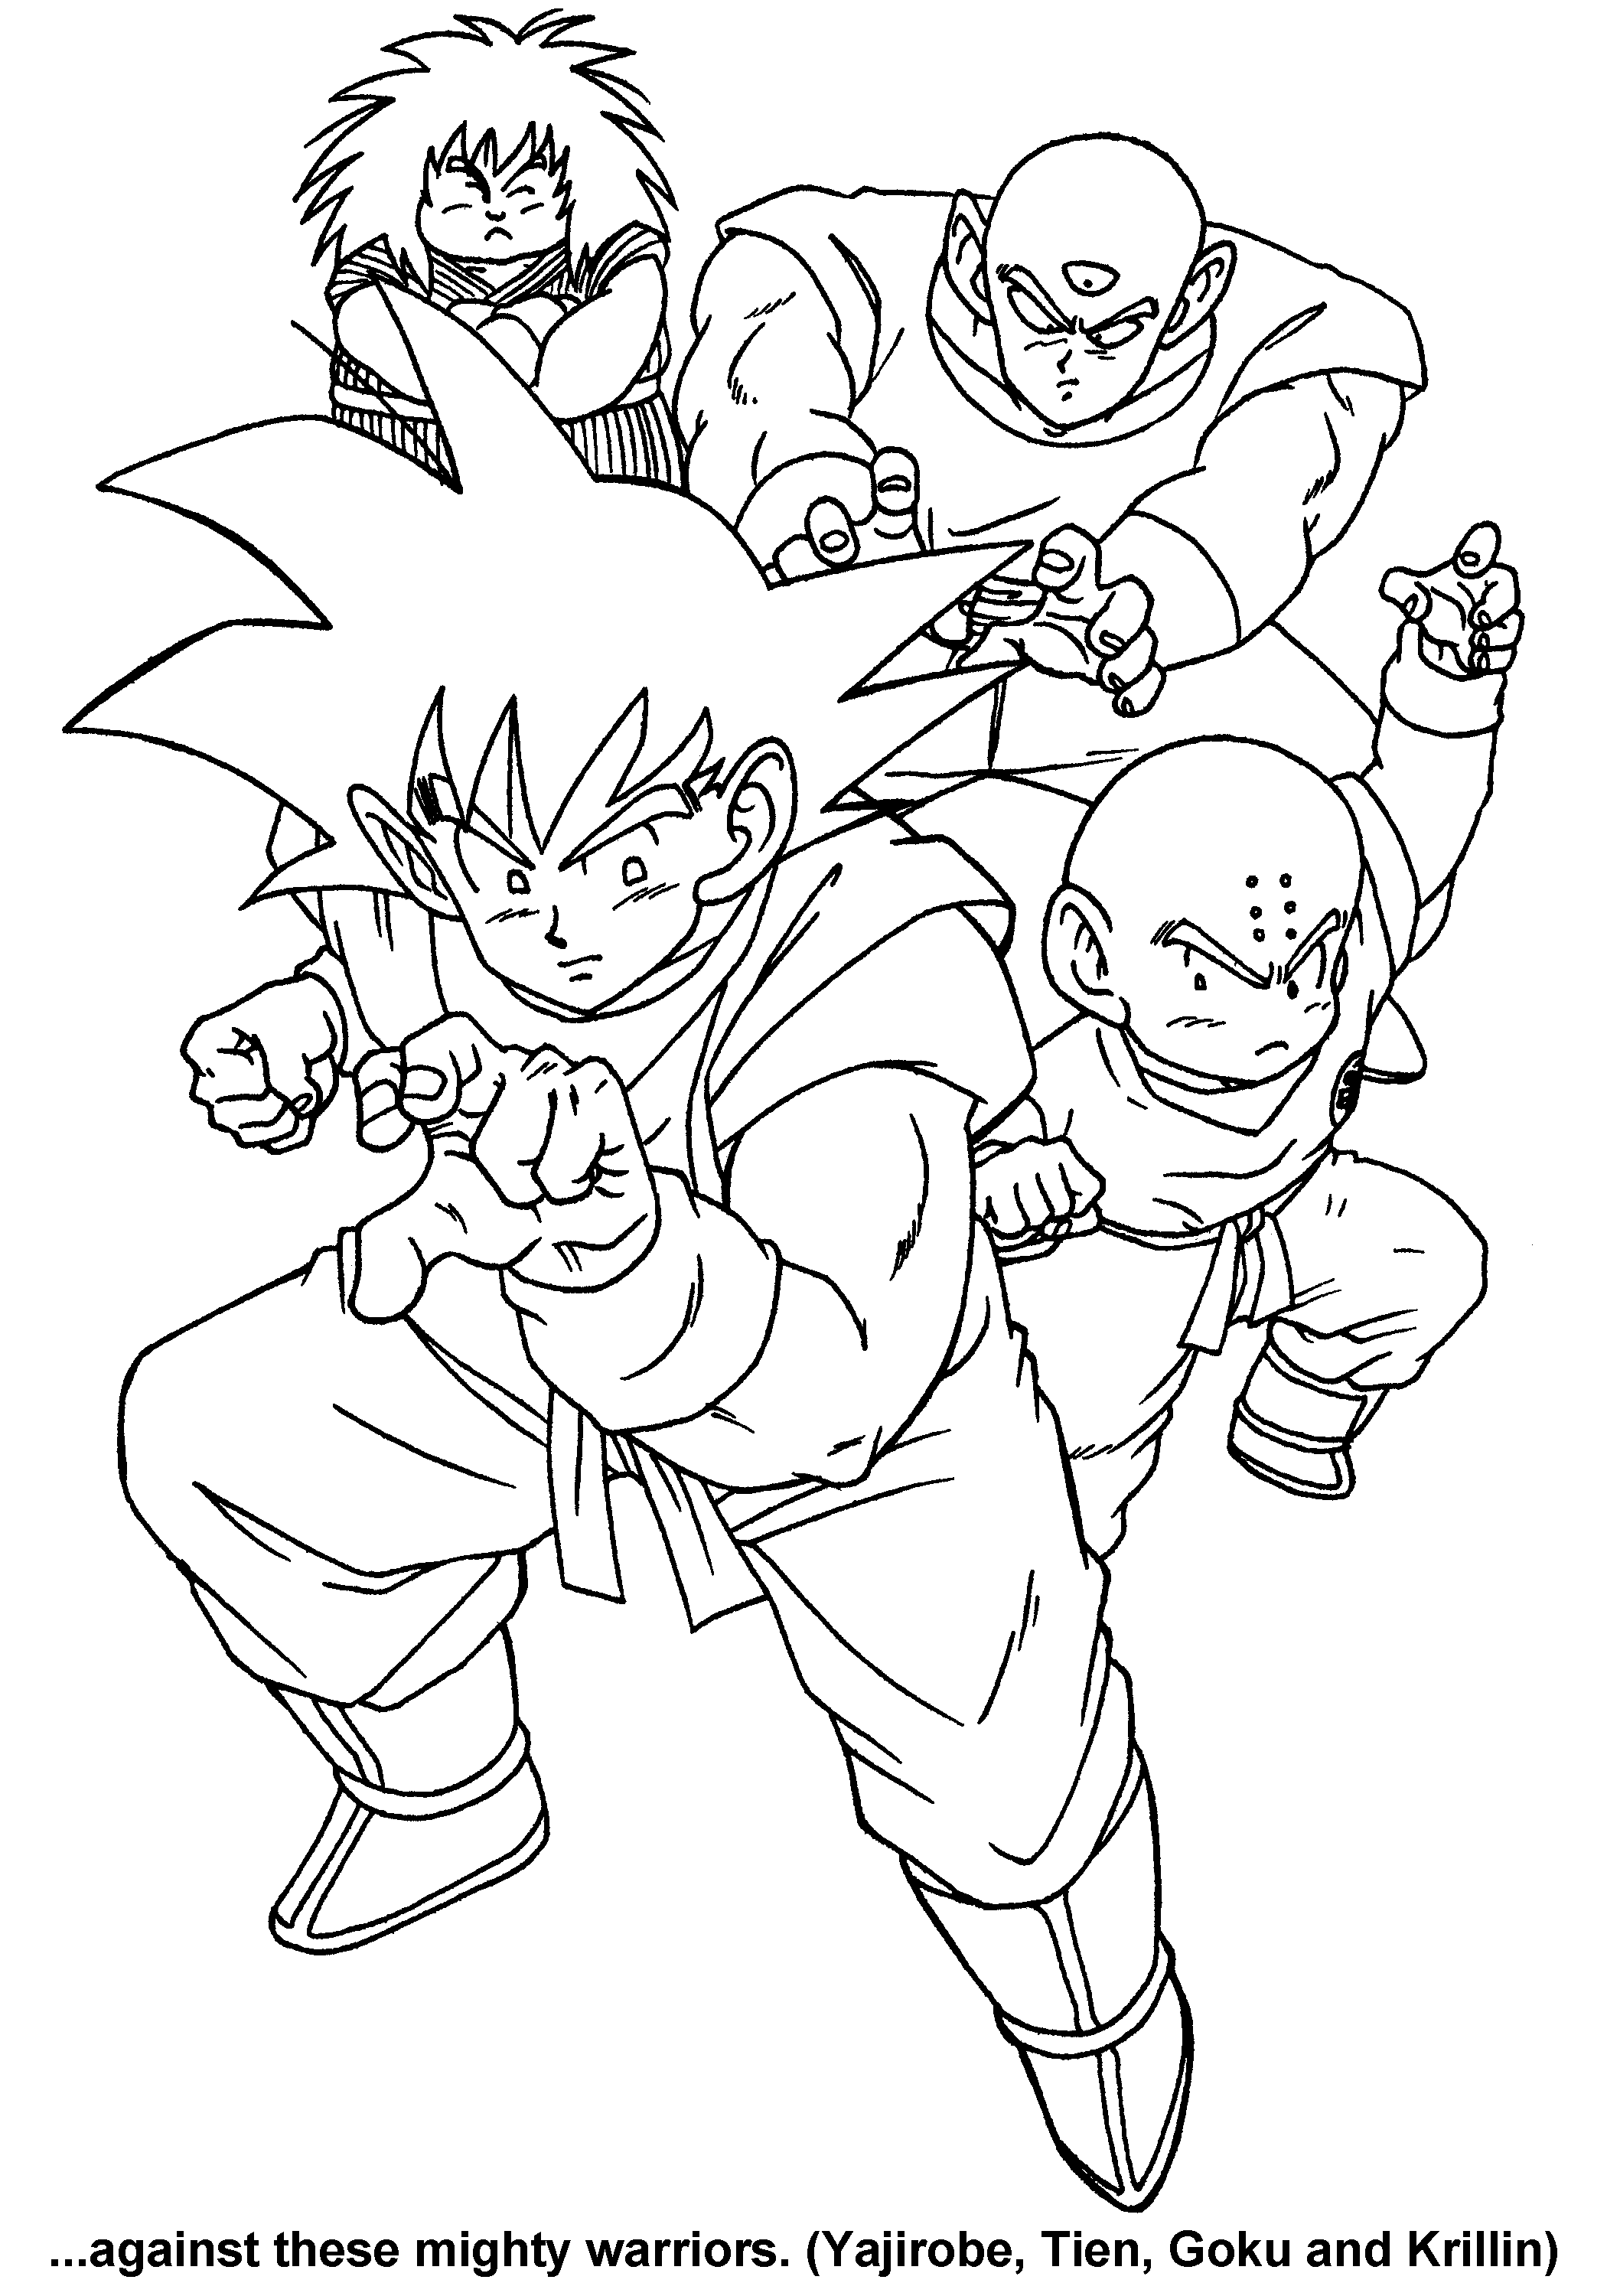 Dragon ball z, Dragon ball and Coloring pages on Pinterest